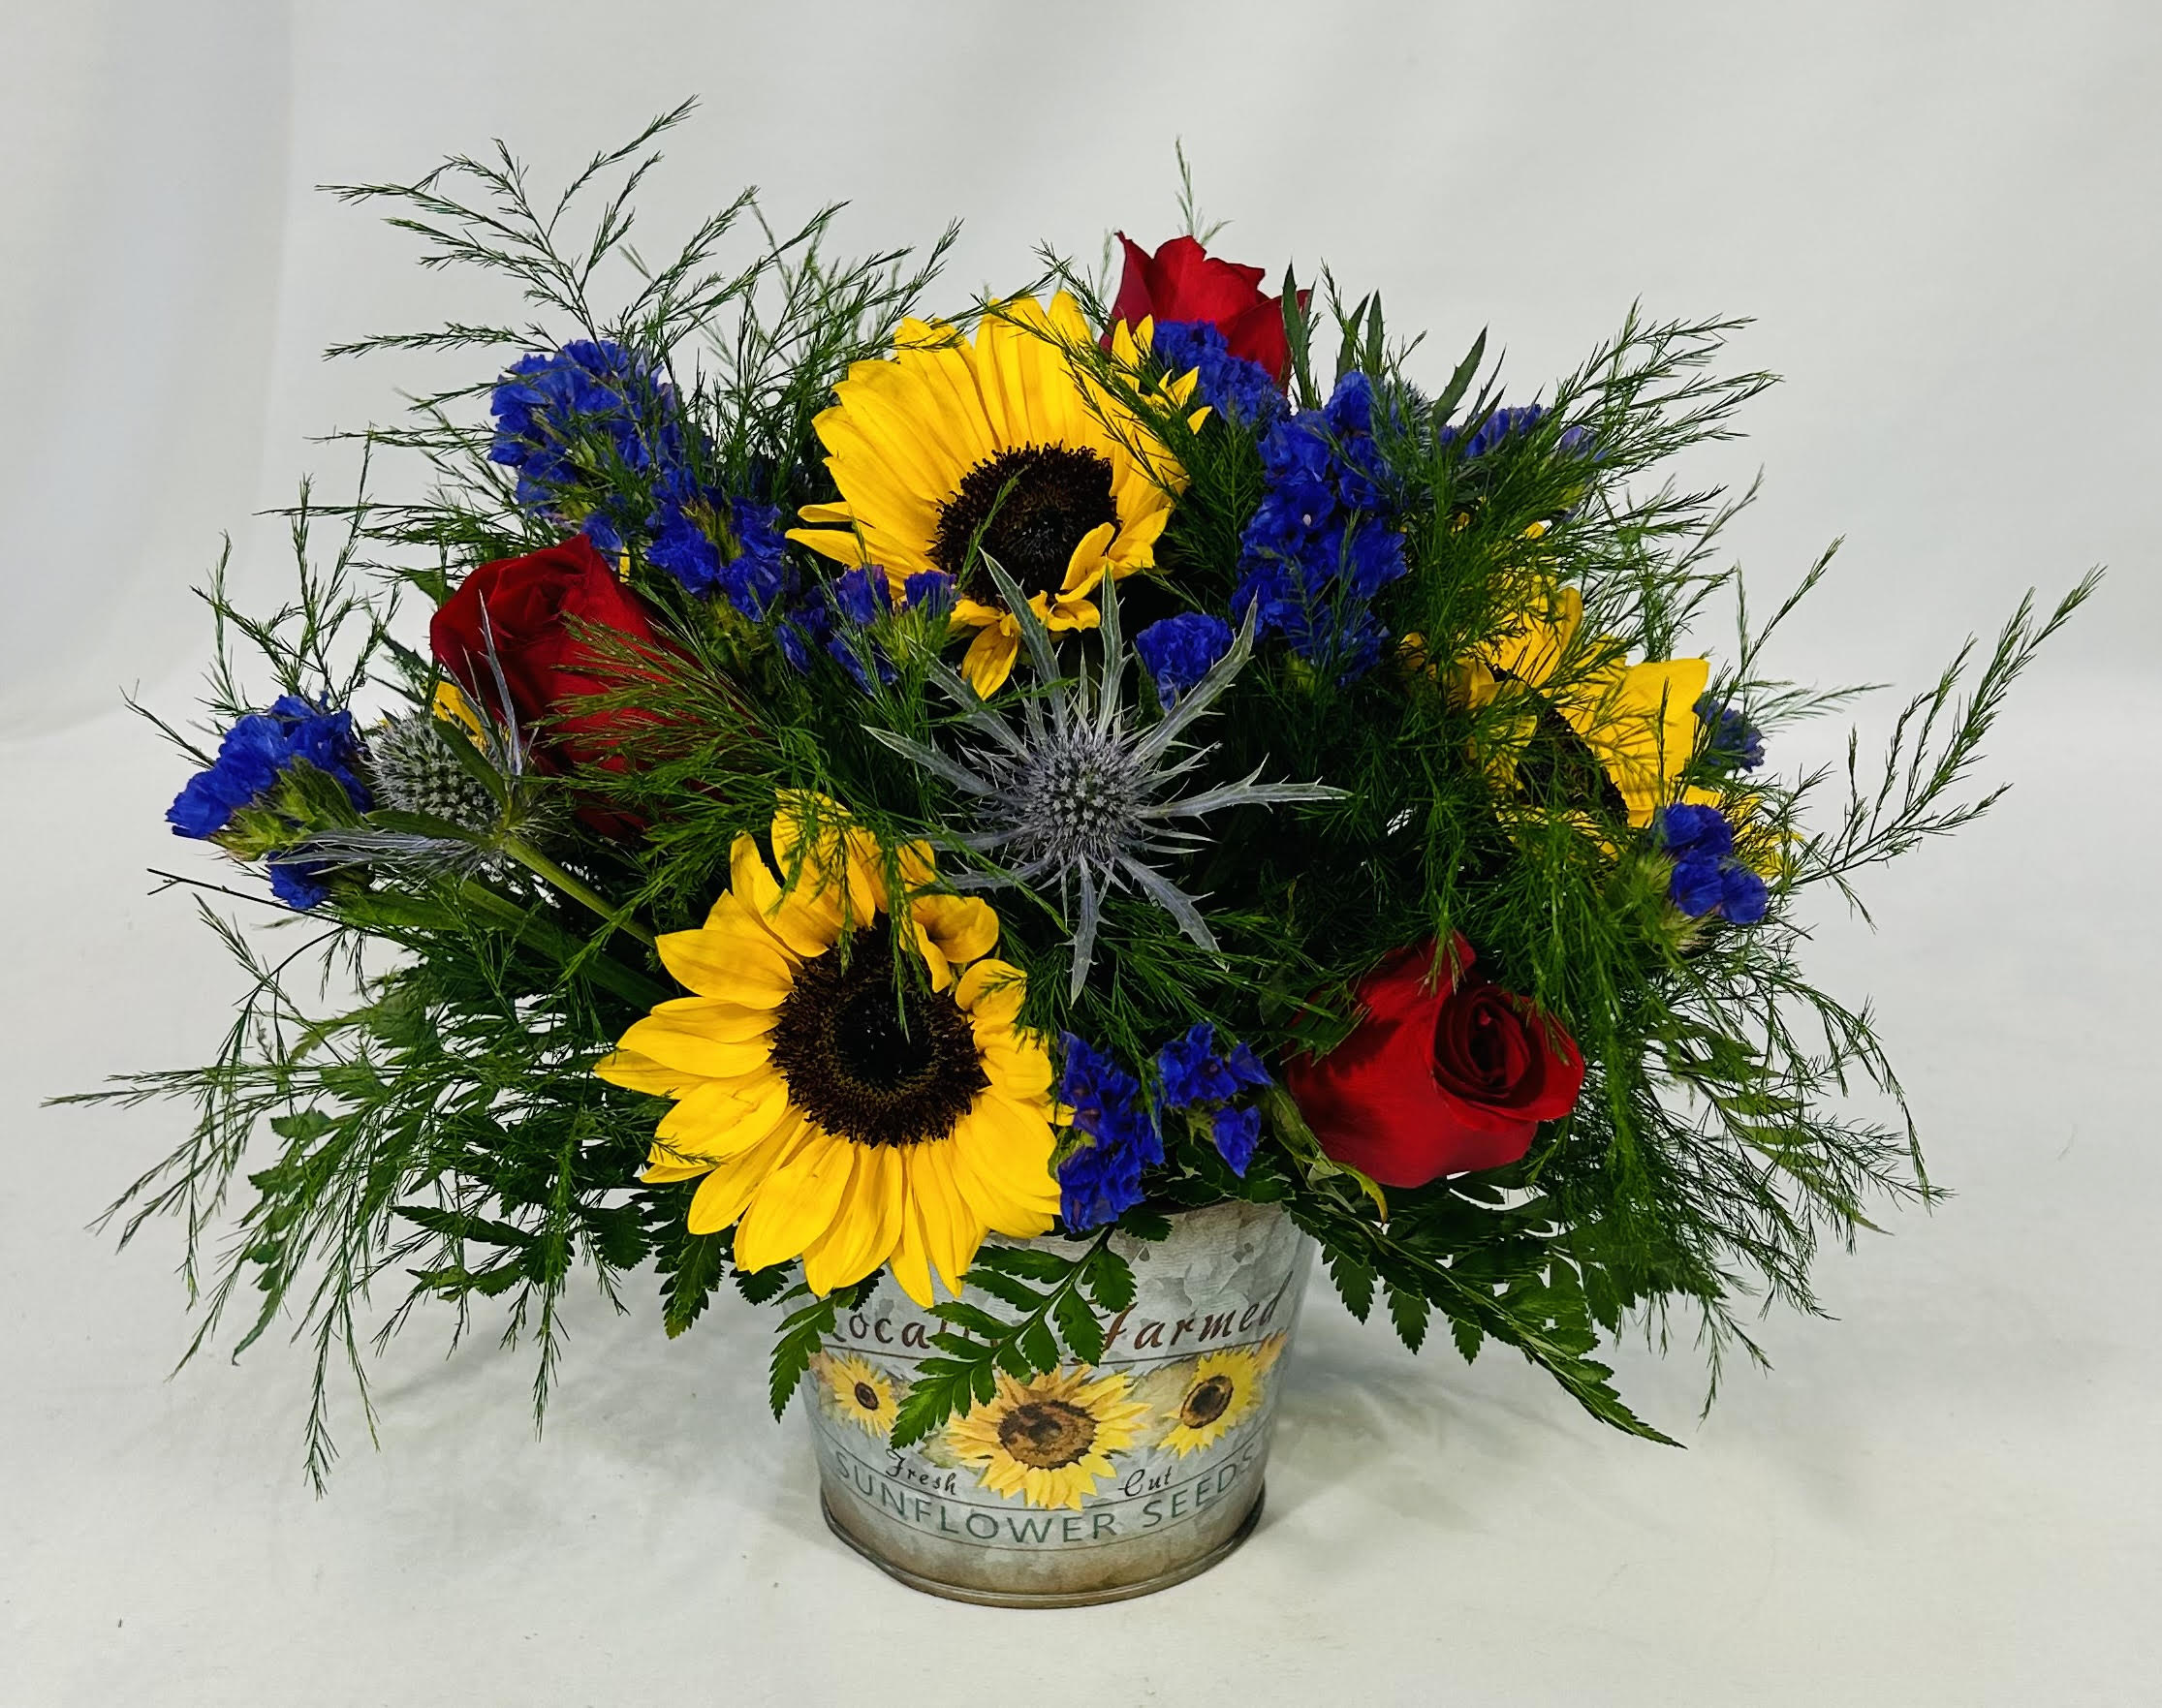 Sunflower Dreams  - Perfect sunflower and red rose arrangement for any occasion. This cute arrangement is perfect for a birthday, just because, get well or to just simply put a smile on someone's face to brighten their day. 